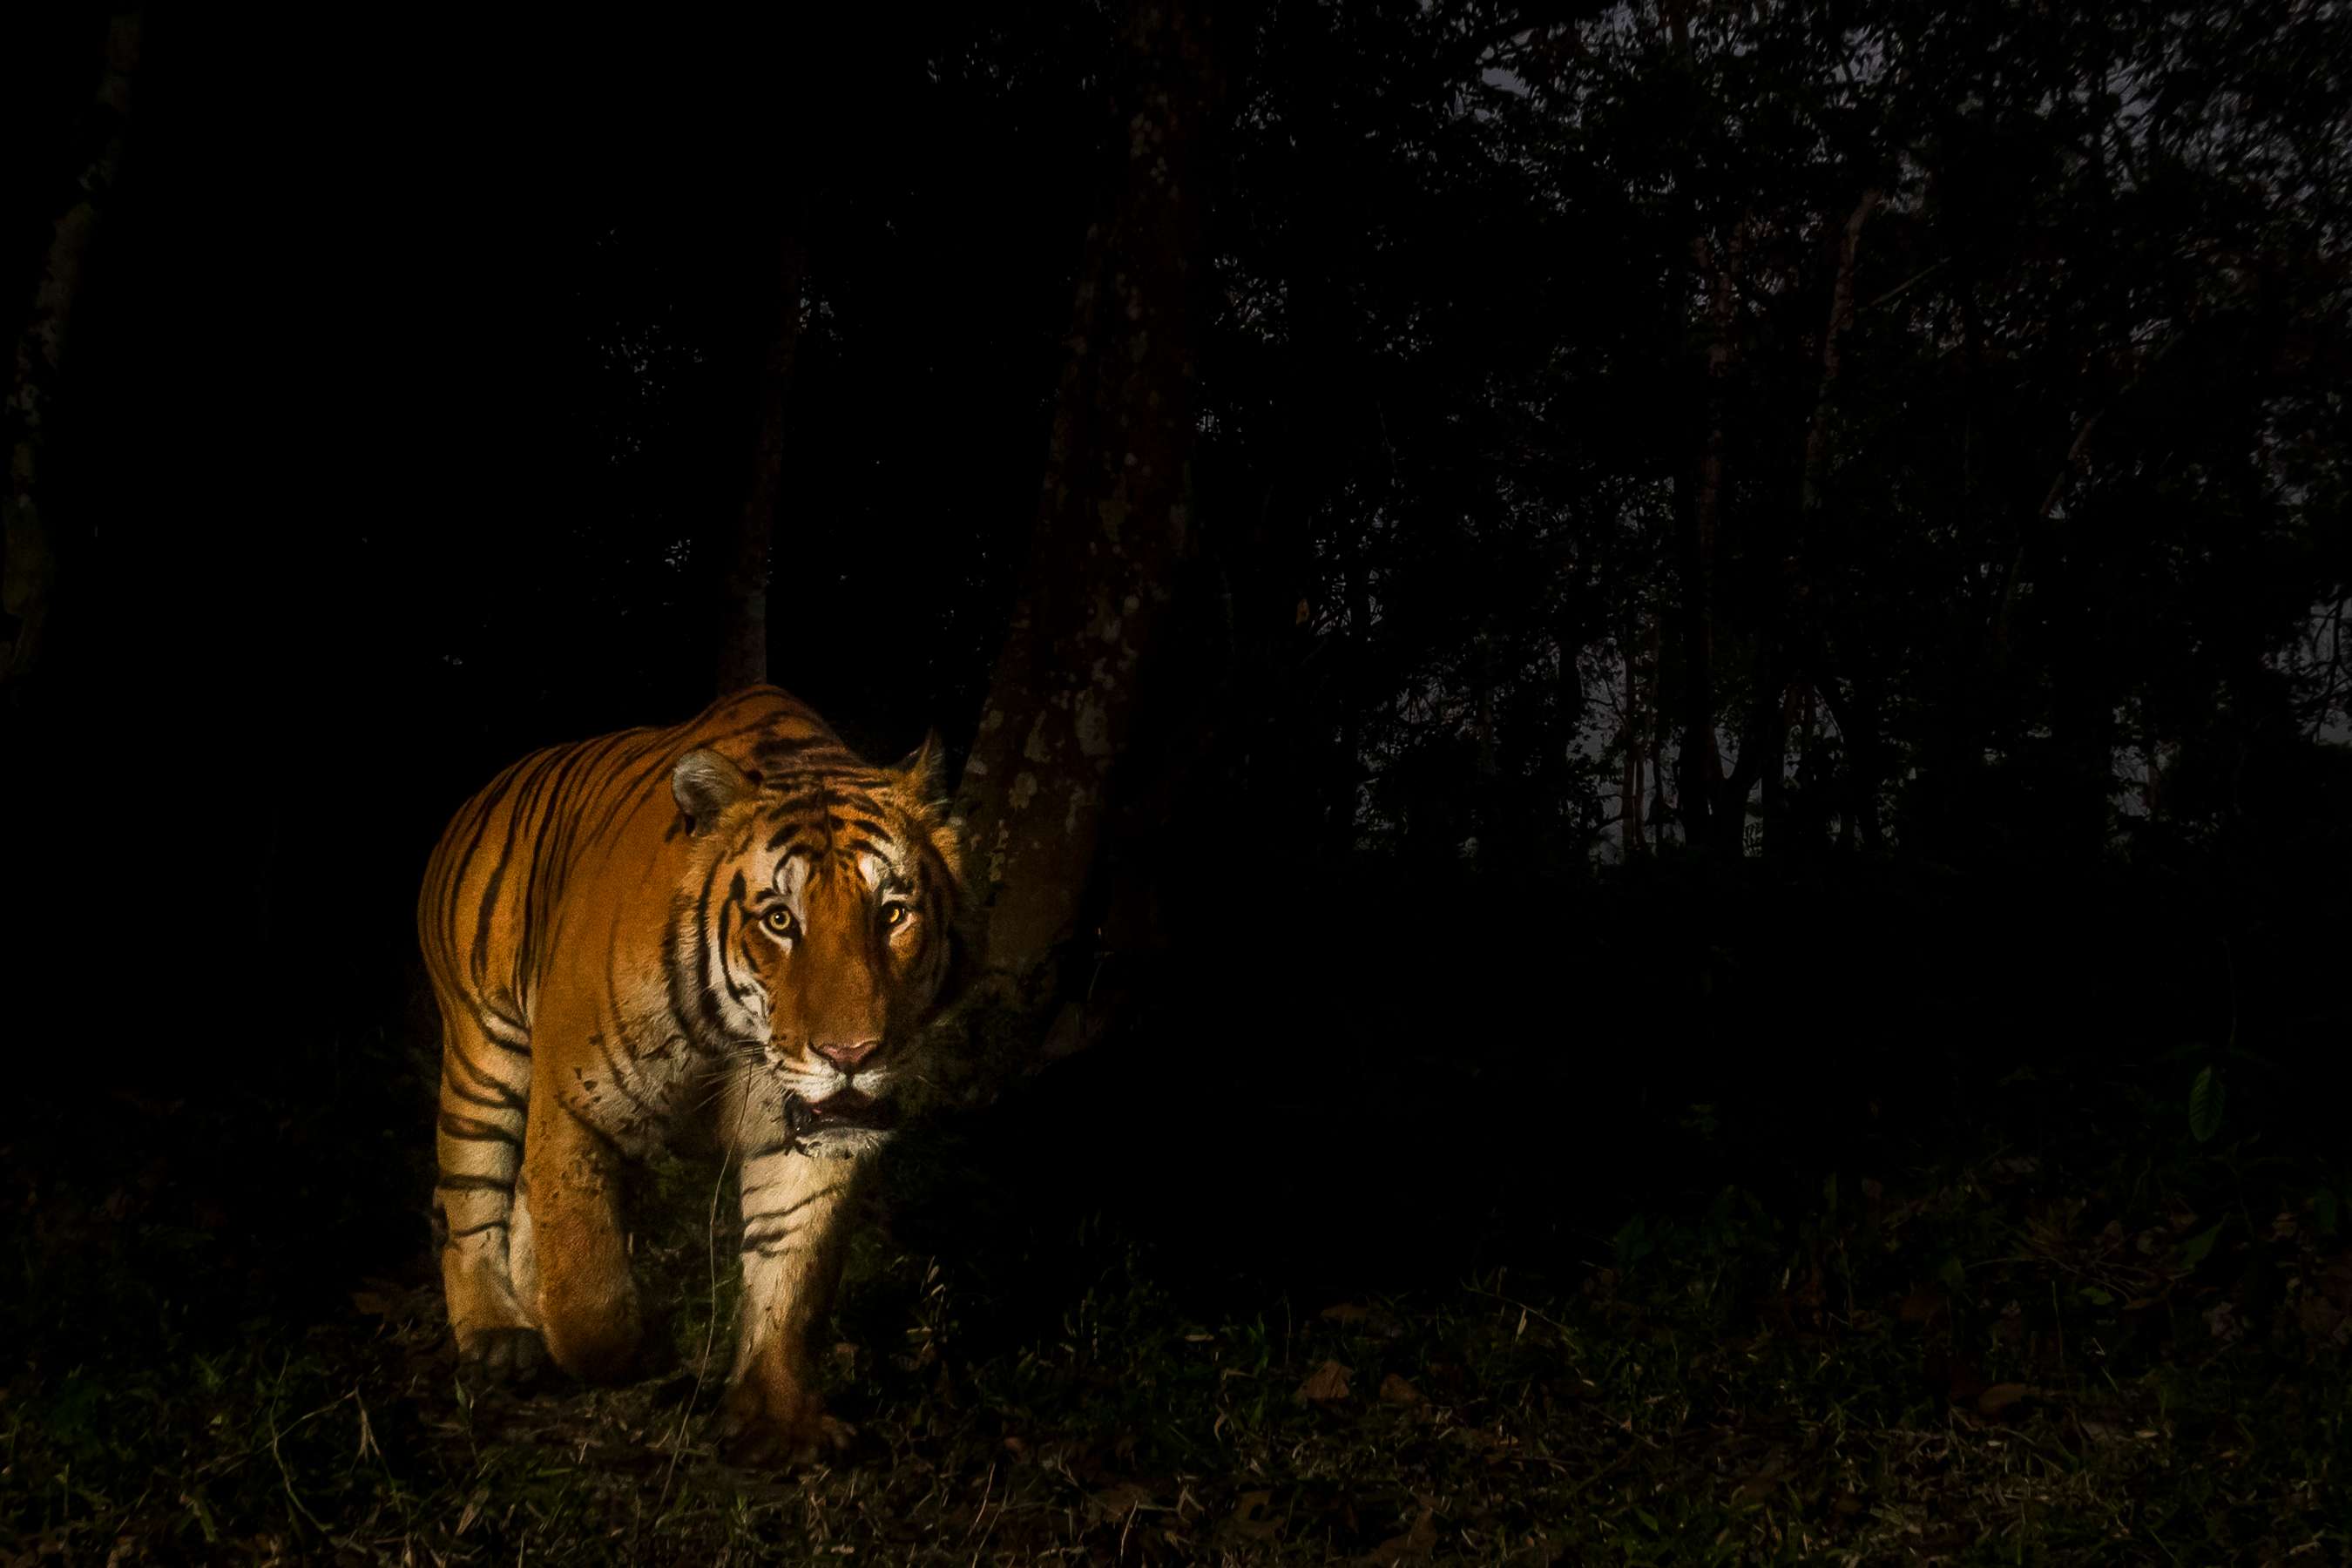 A Bengal tiger, taken by a camera trap in Kaziranga National Park, which is home to the highest density of tigers in protected areas in the world. © Christy Williams/WWF